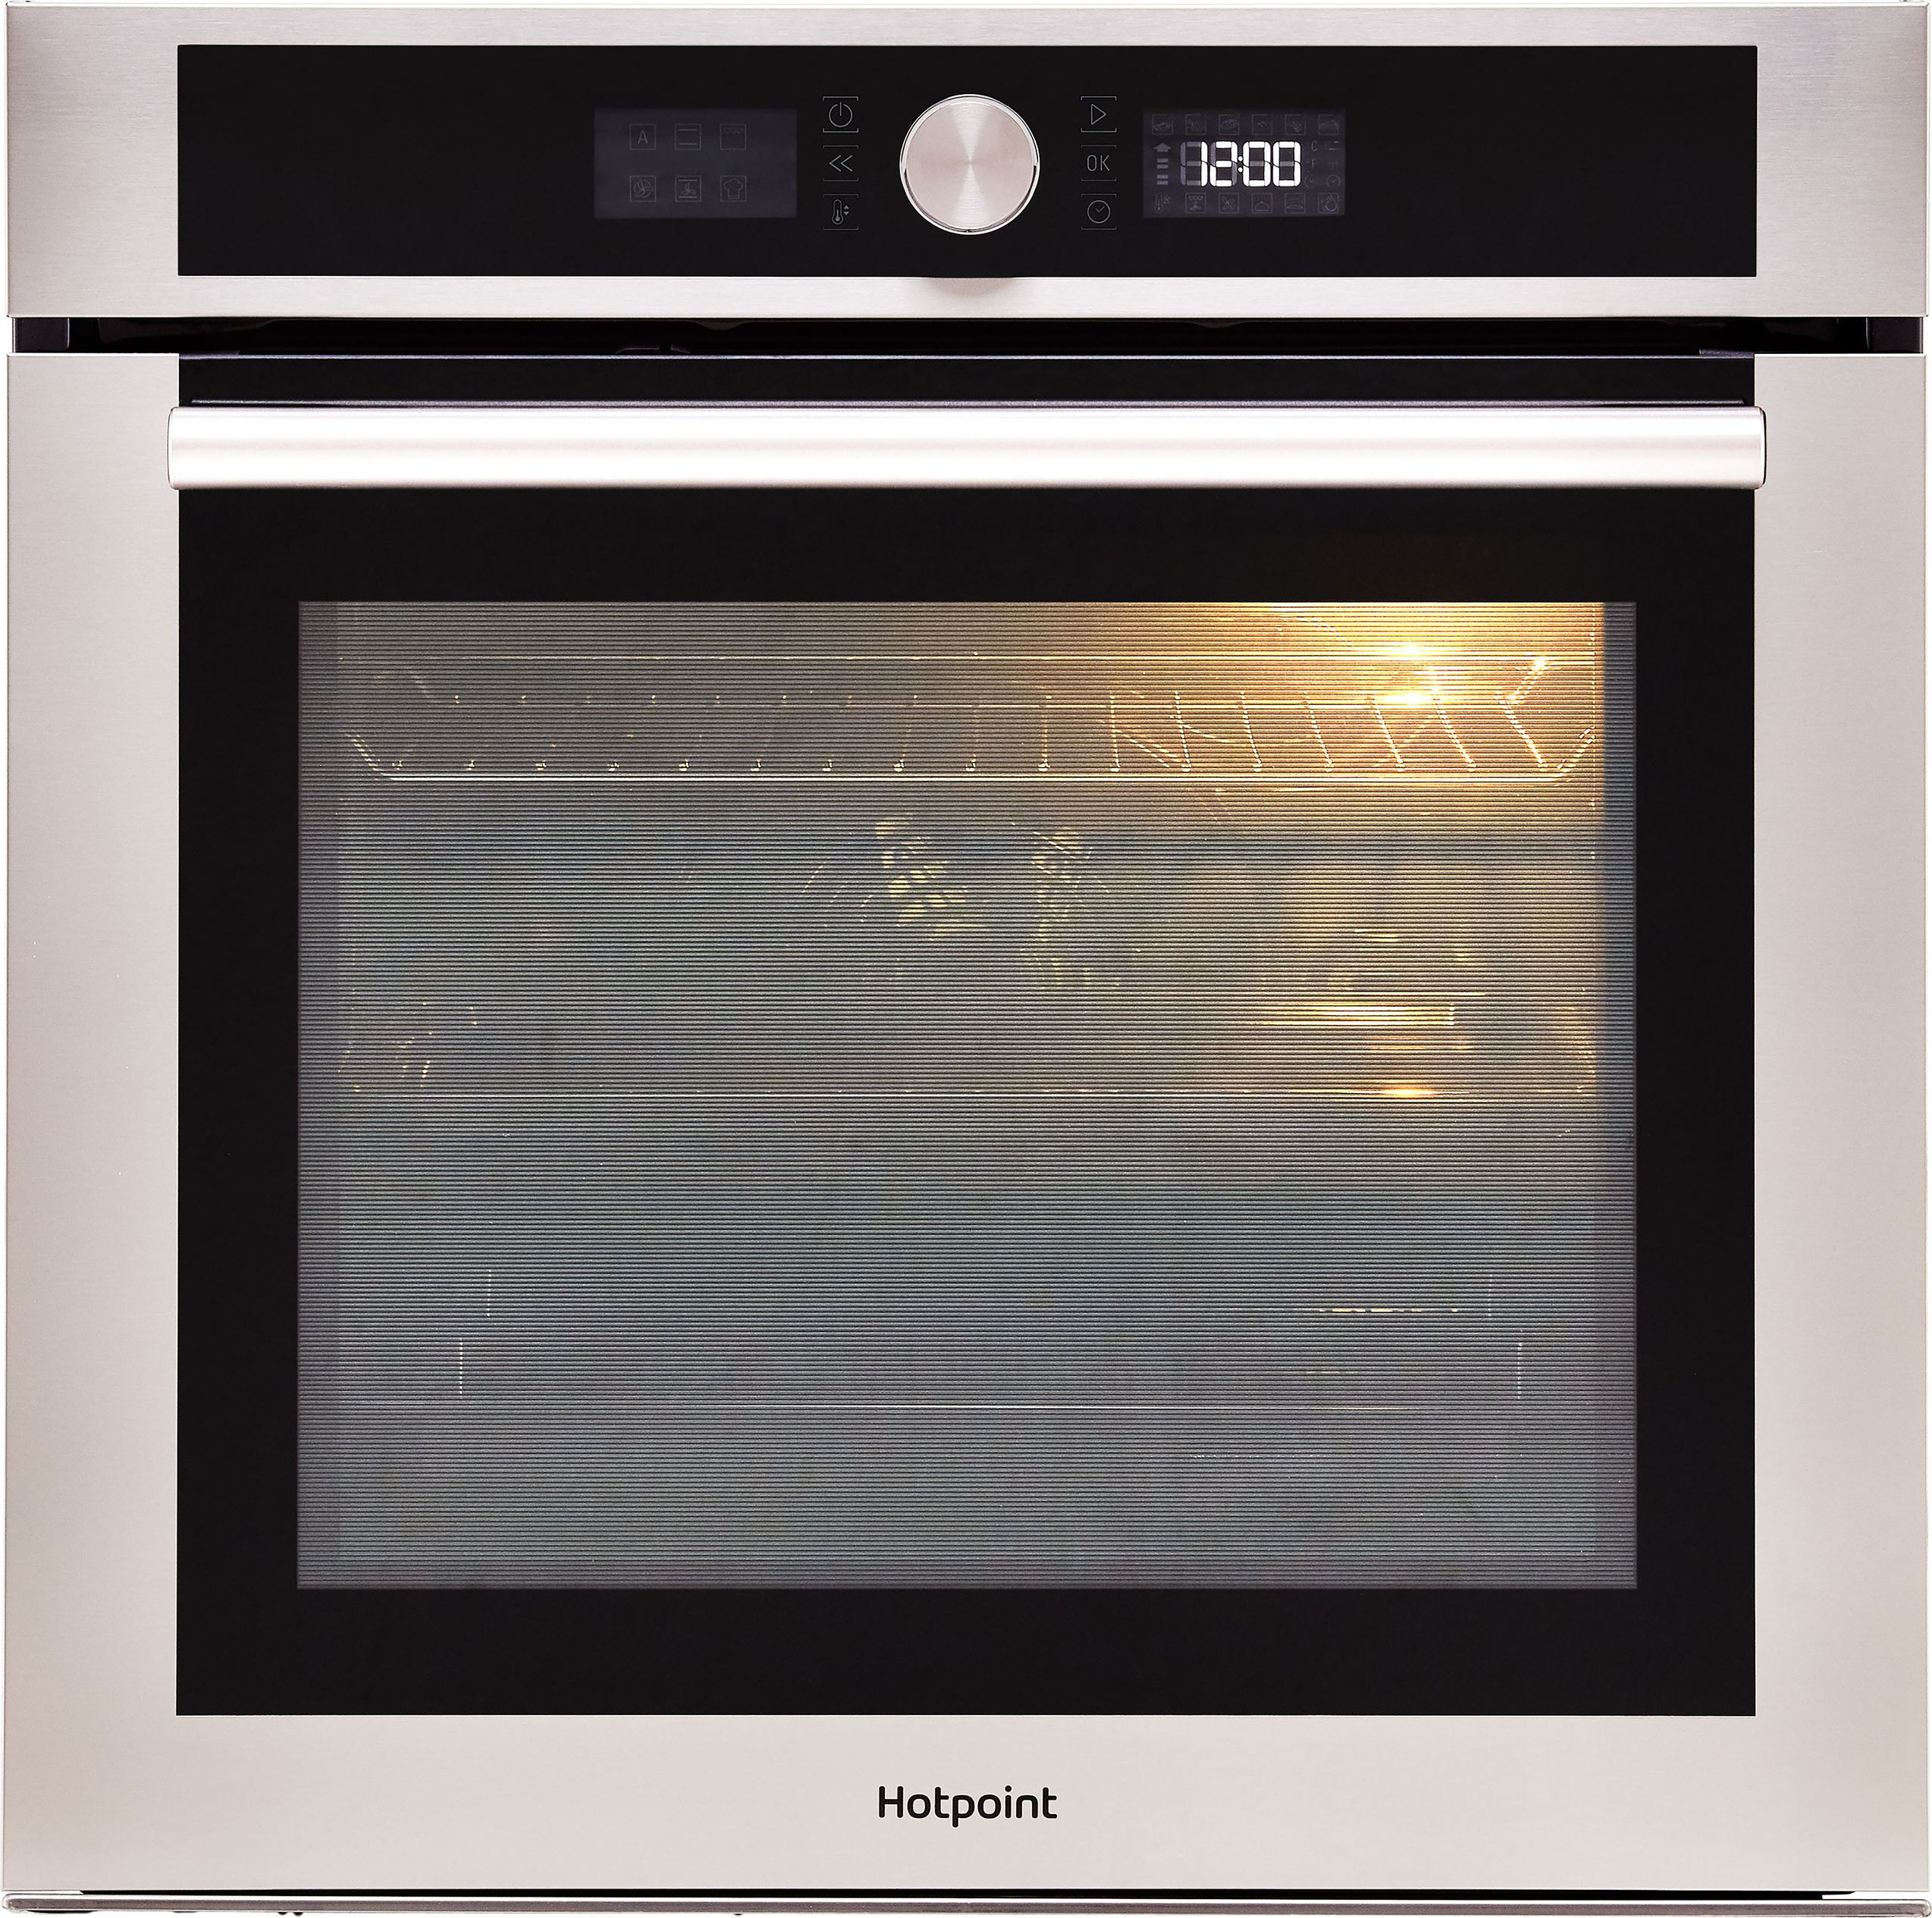 Hotpoint Class 4 SI4854HIX Built In Electric Single Oven - Stainless Steel - A+ Rated, Stainless Steel